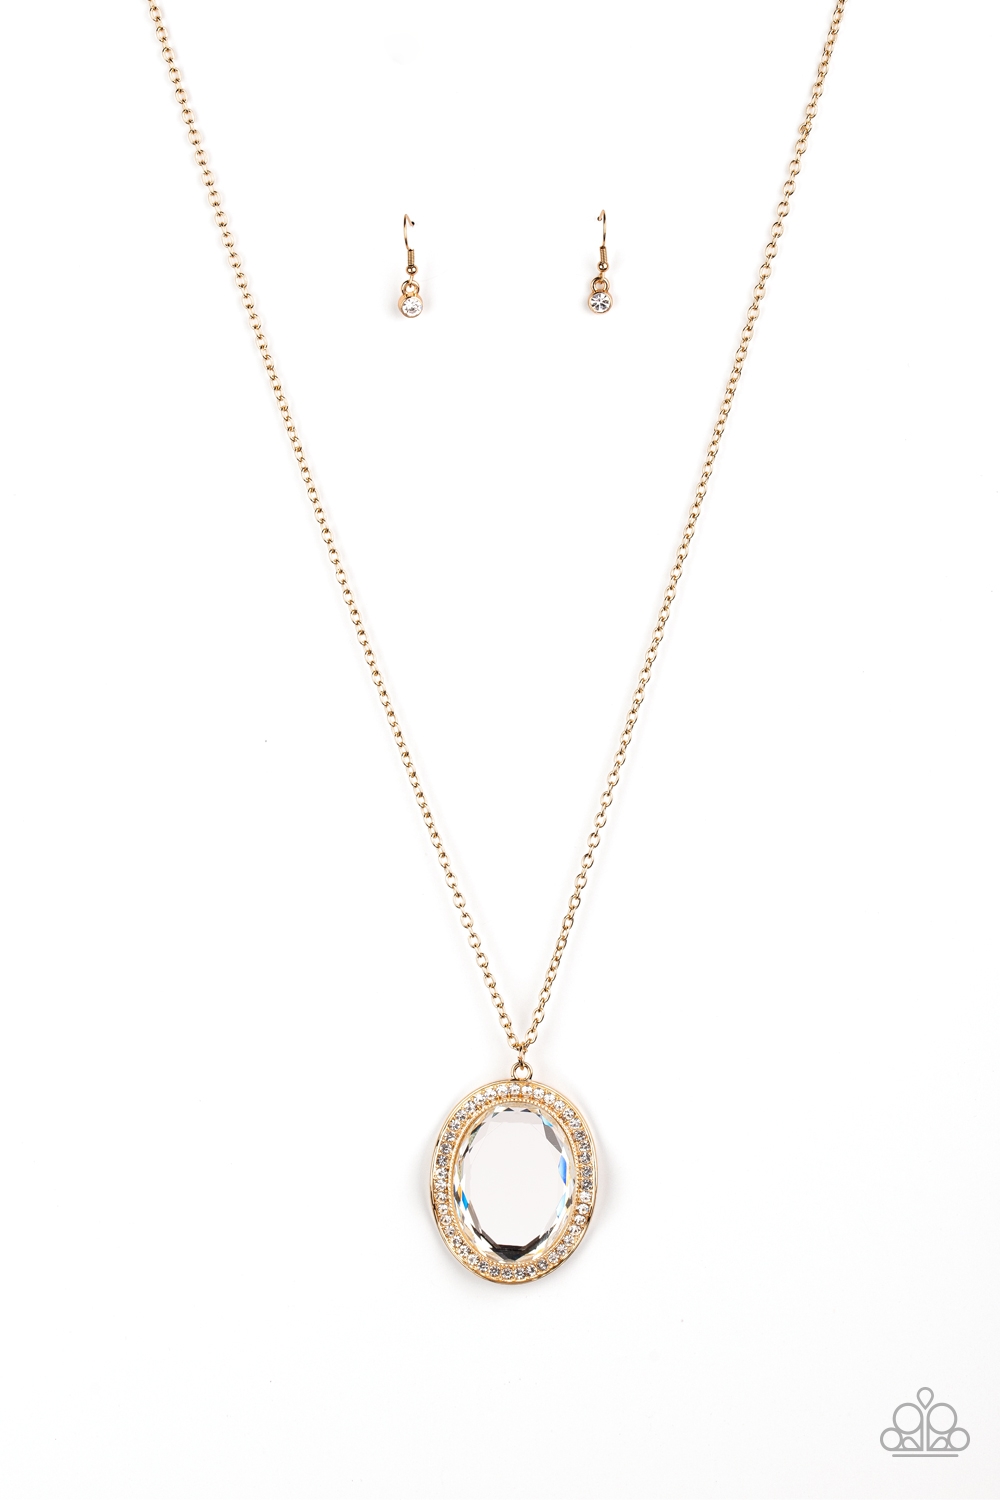 Necklace - REIGN Them In - Gold